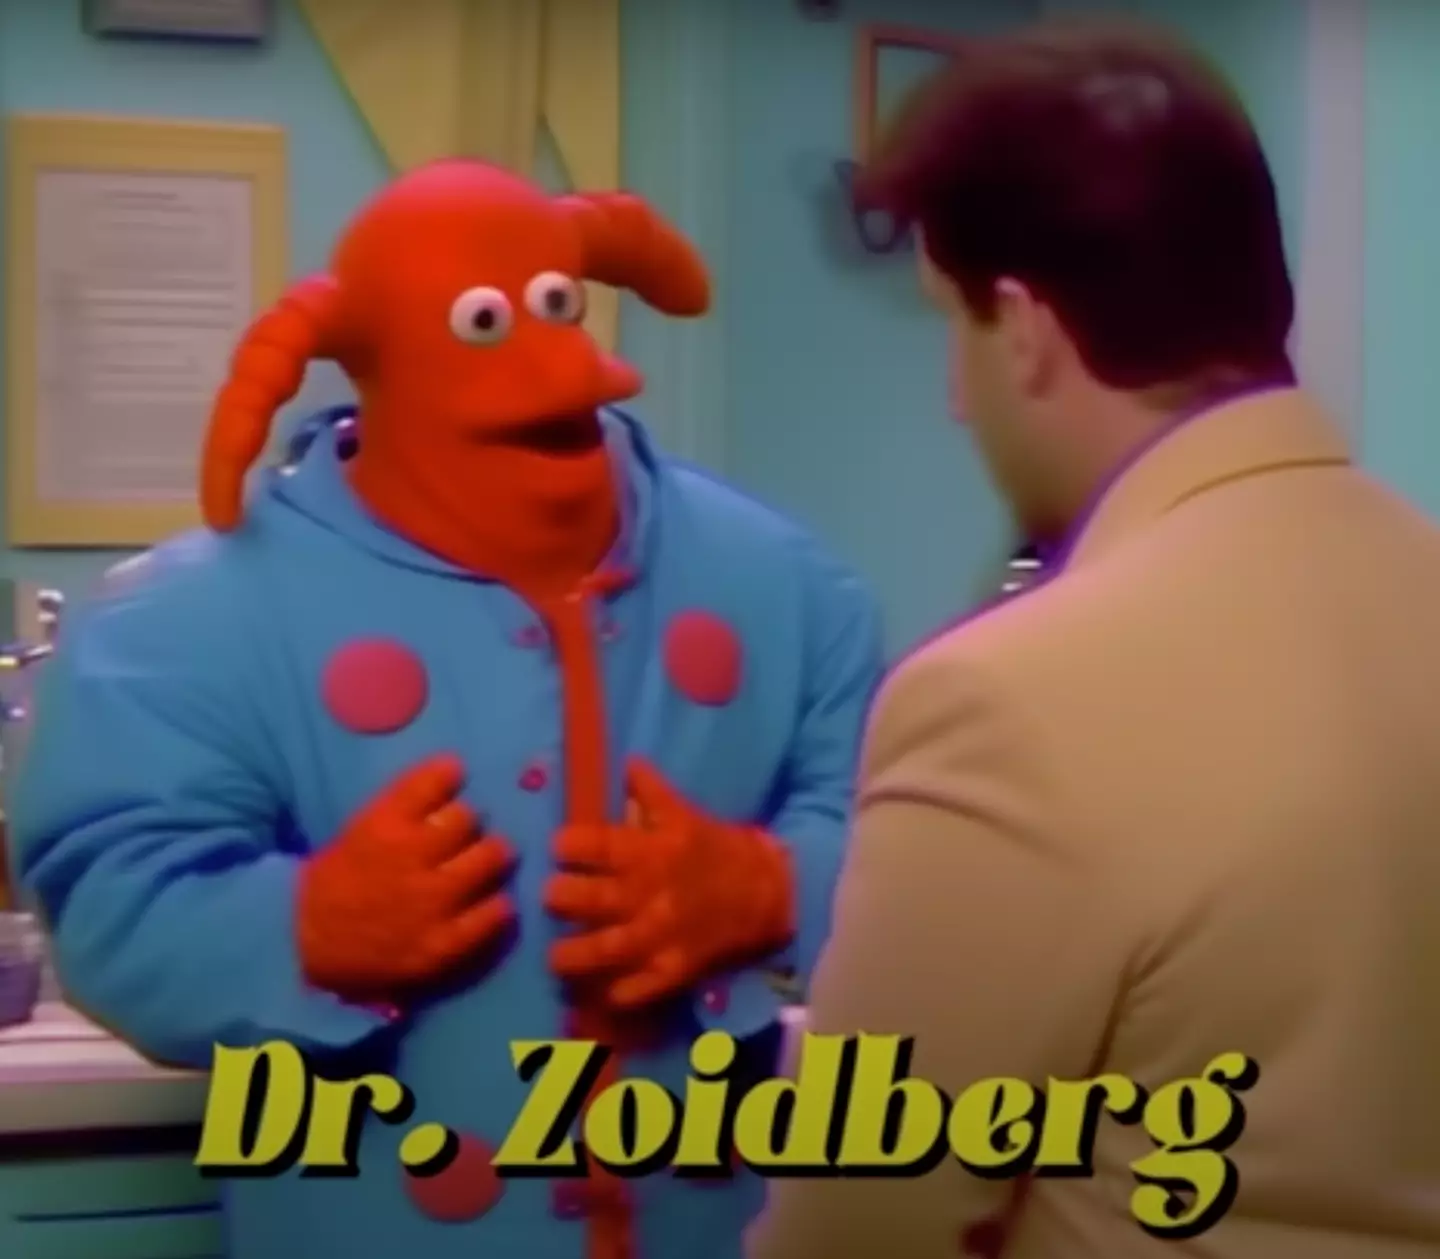 Even Dr Zoidberg makes an appearance during the opening sequence.